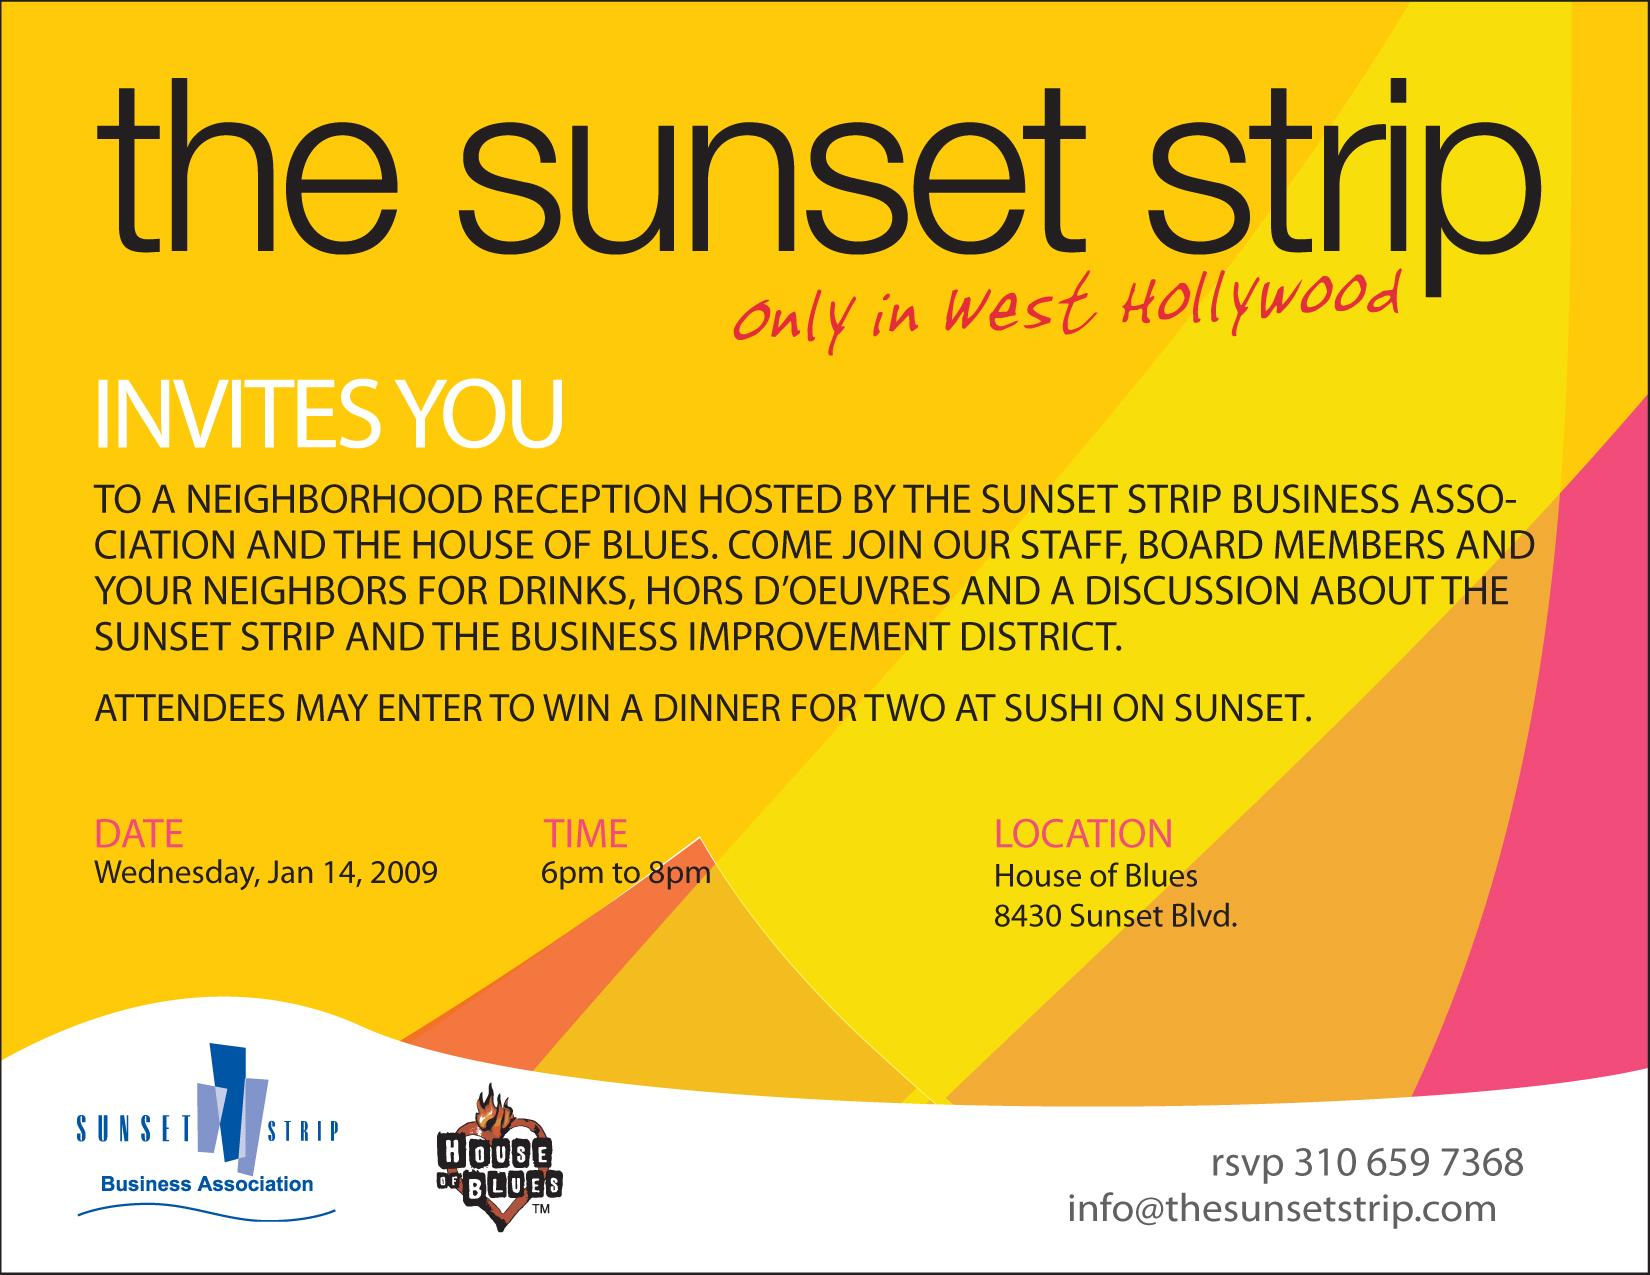 Sunset Strip Business Association And House Of Blues To Host Neighborhood Reception